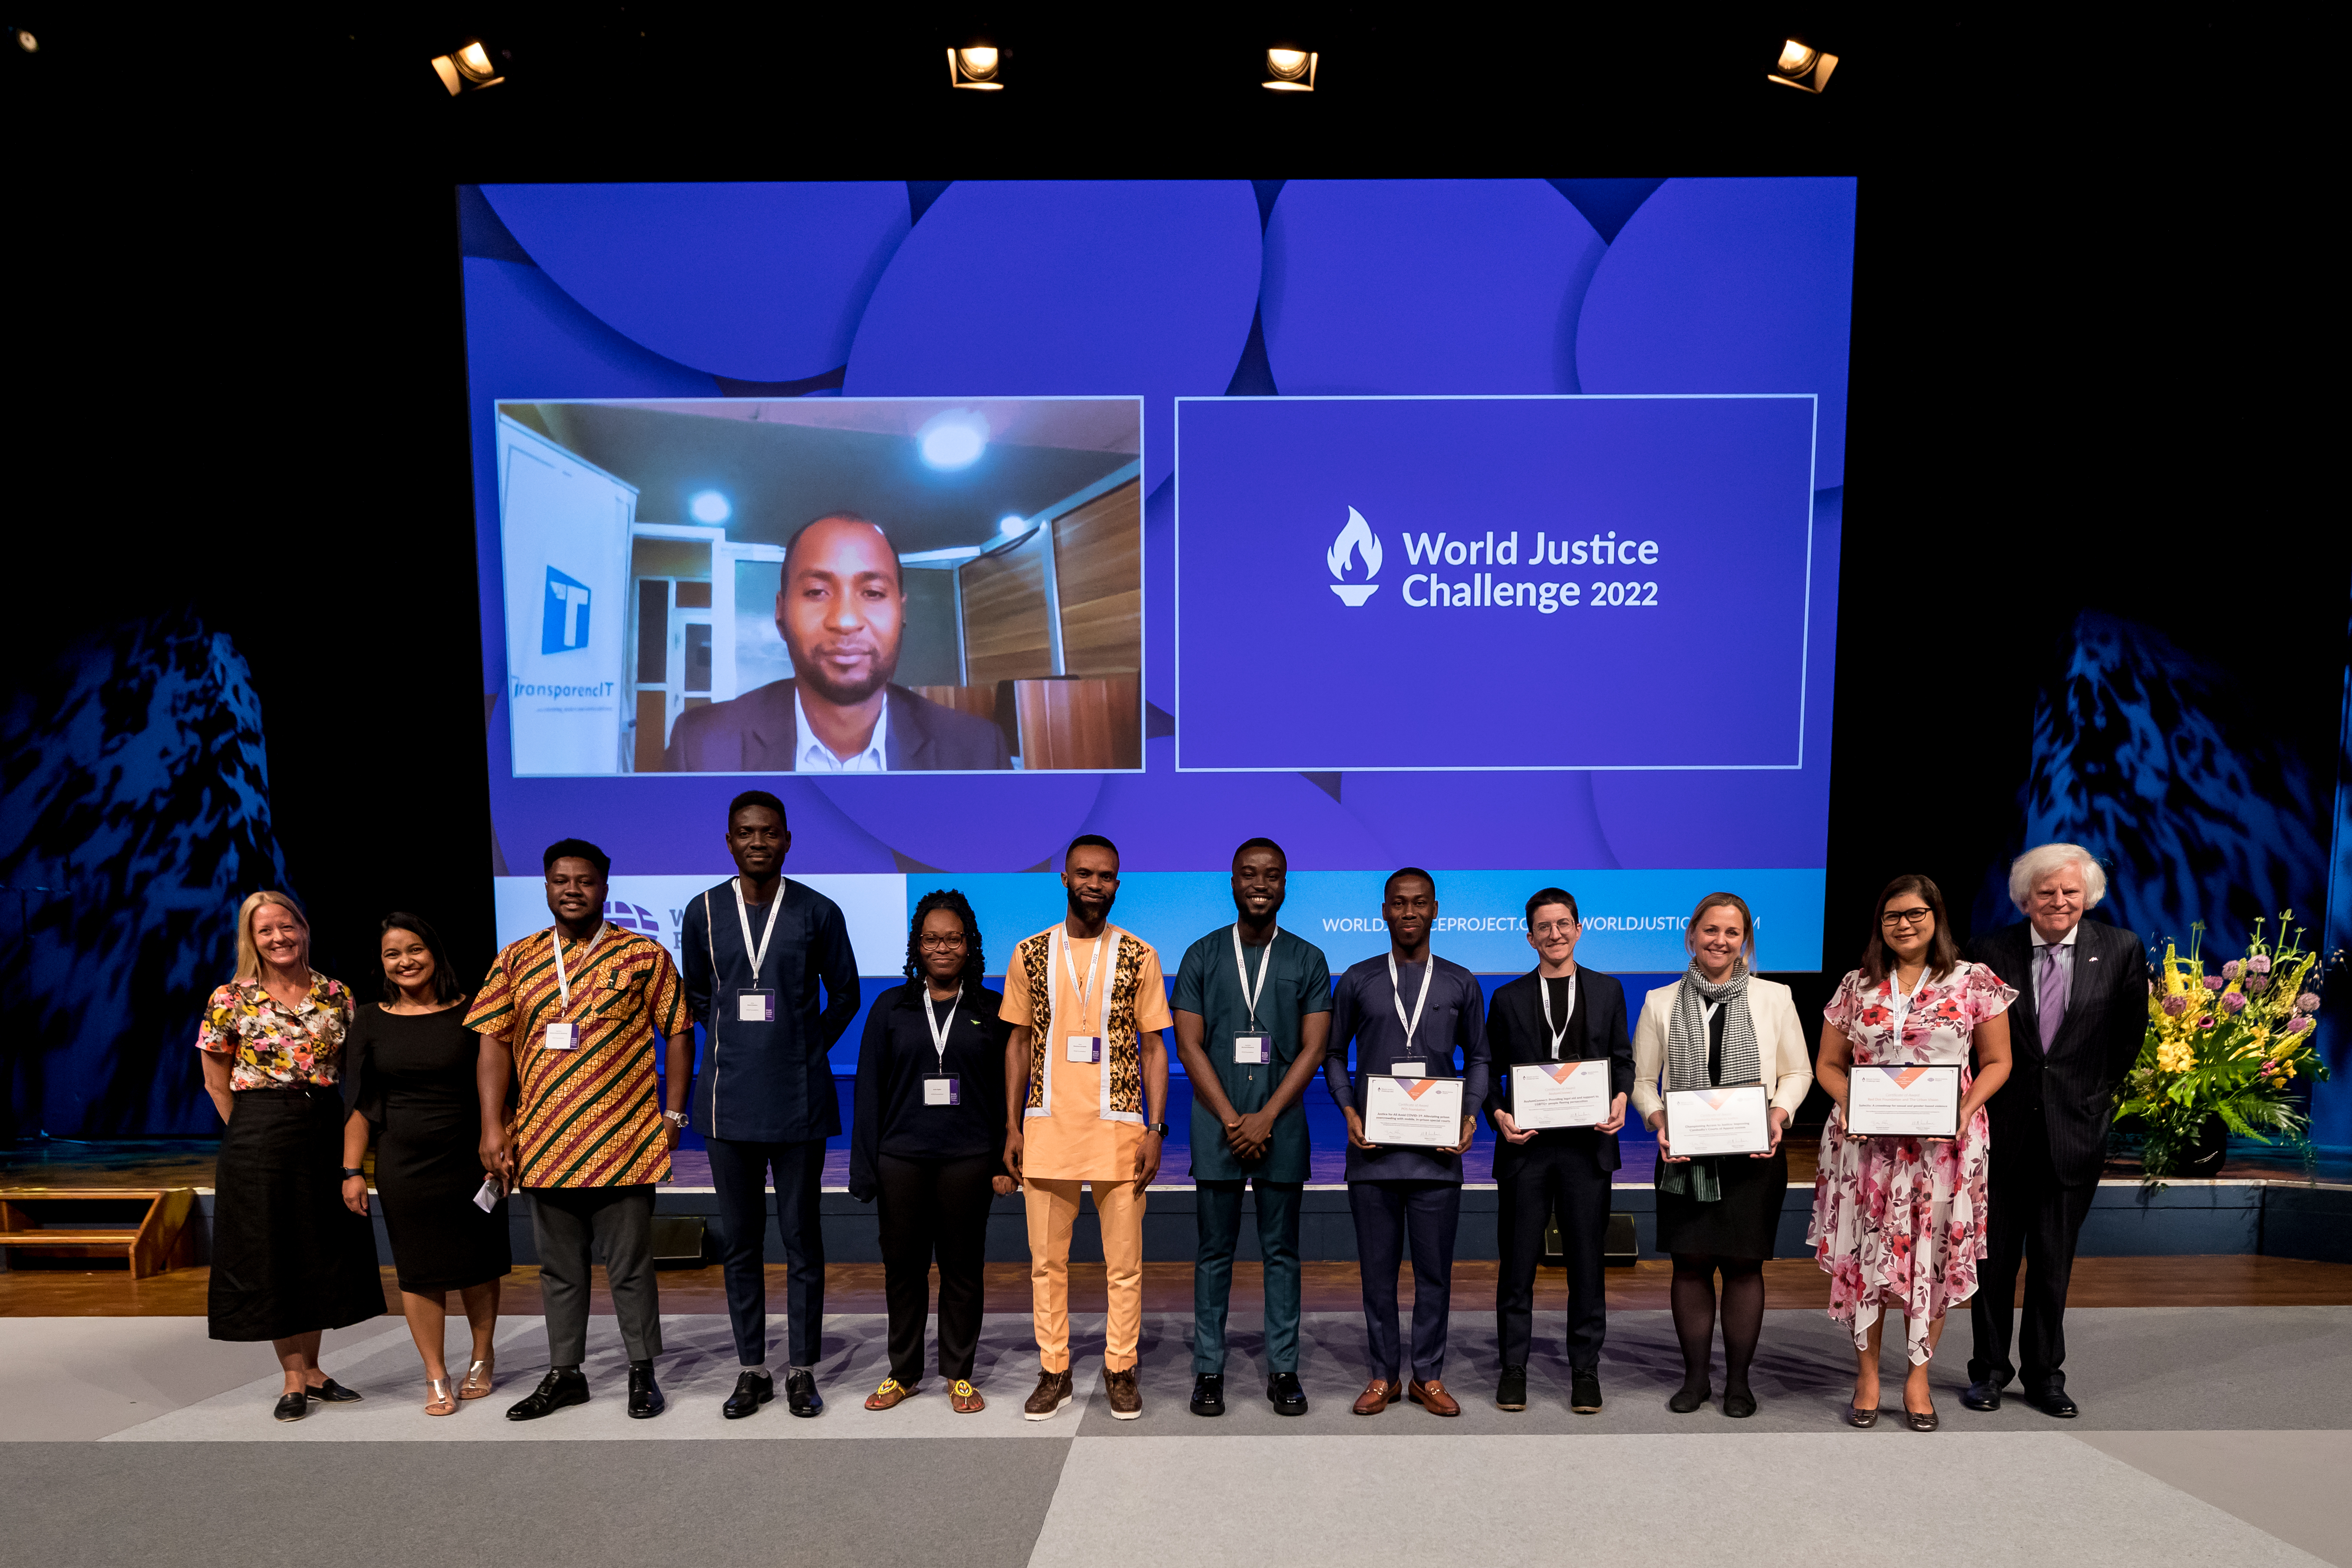 The World Justice Challenge 2022 winners